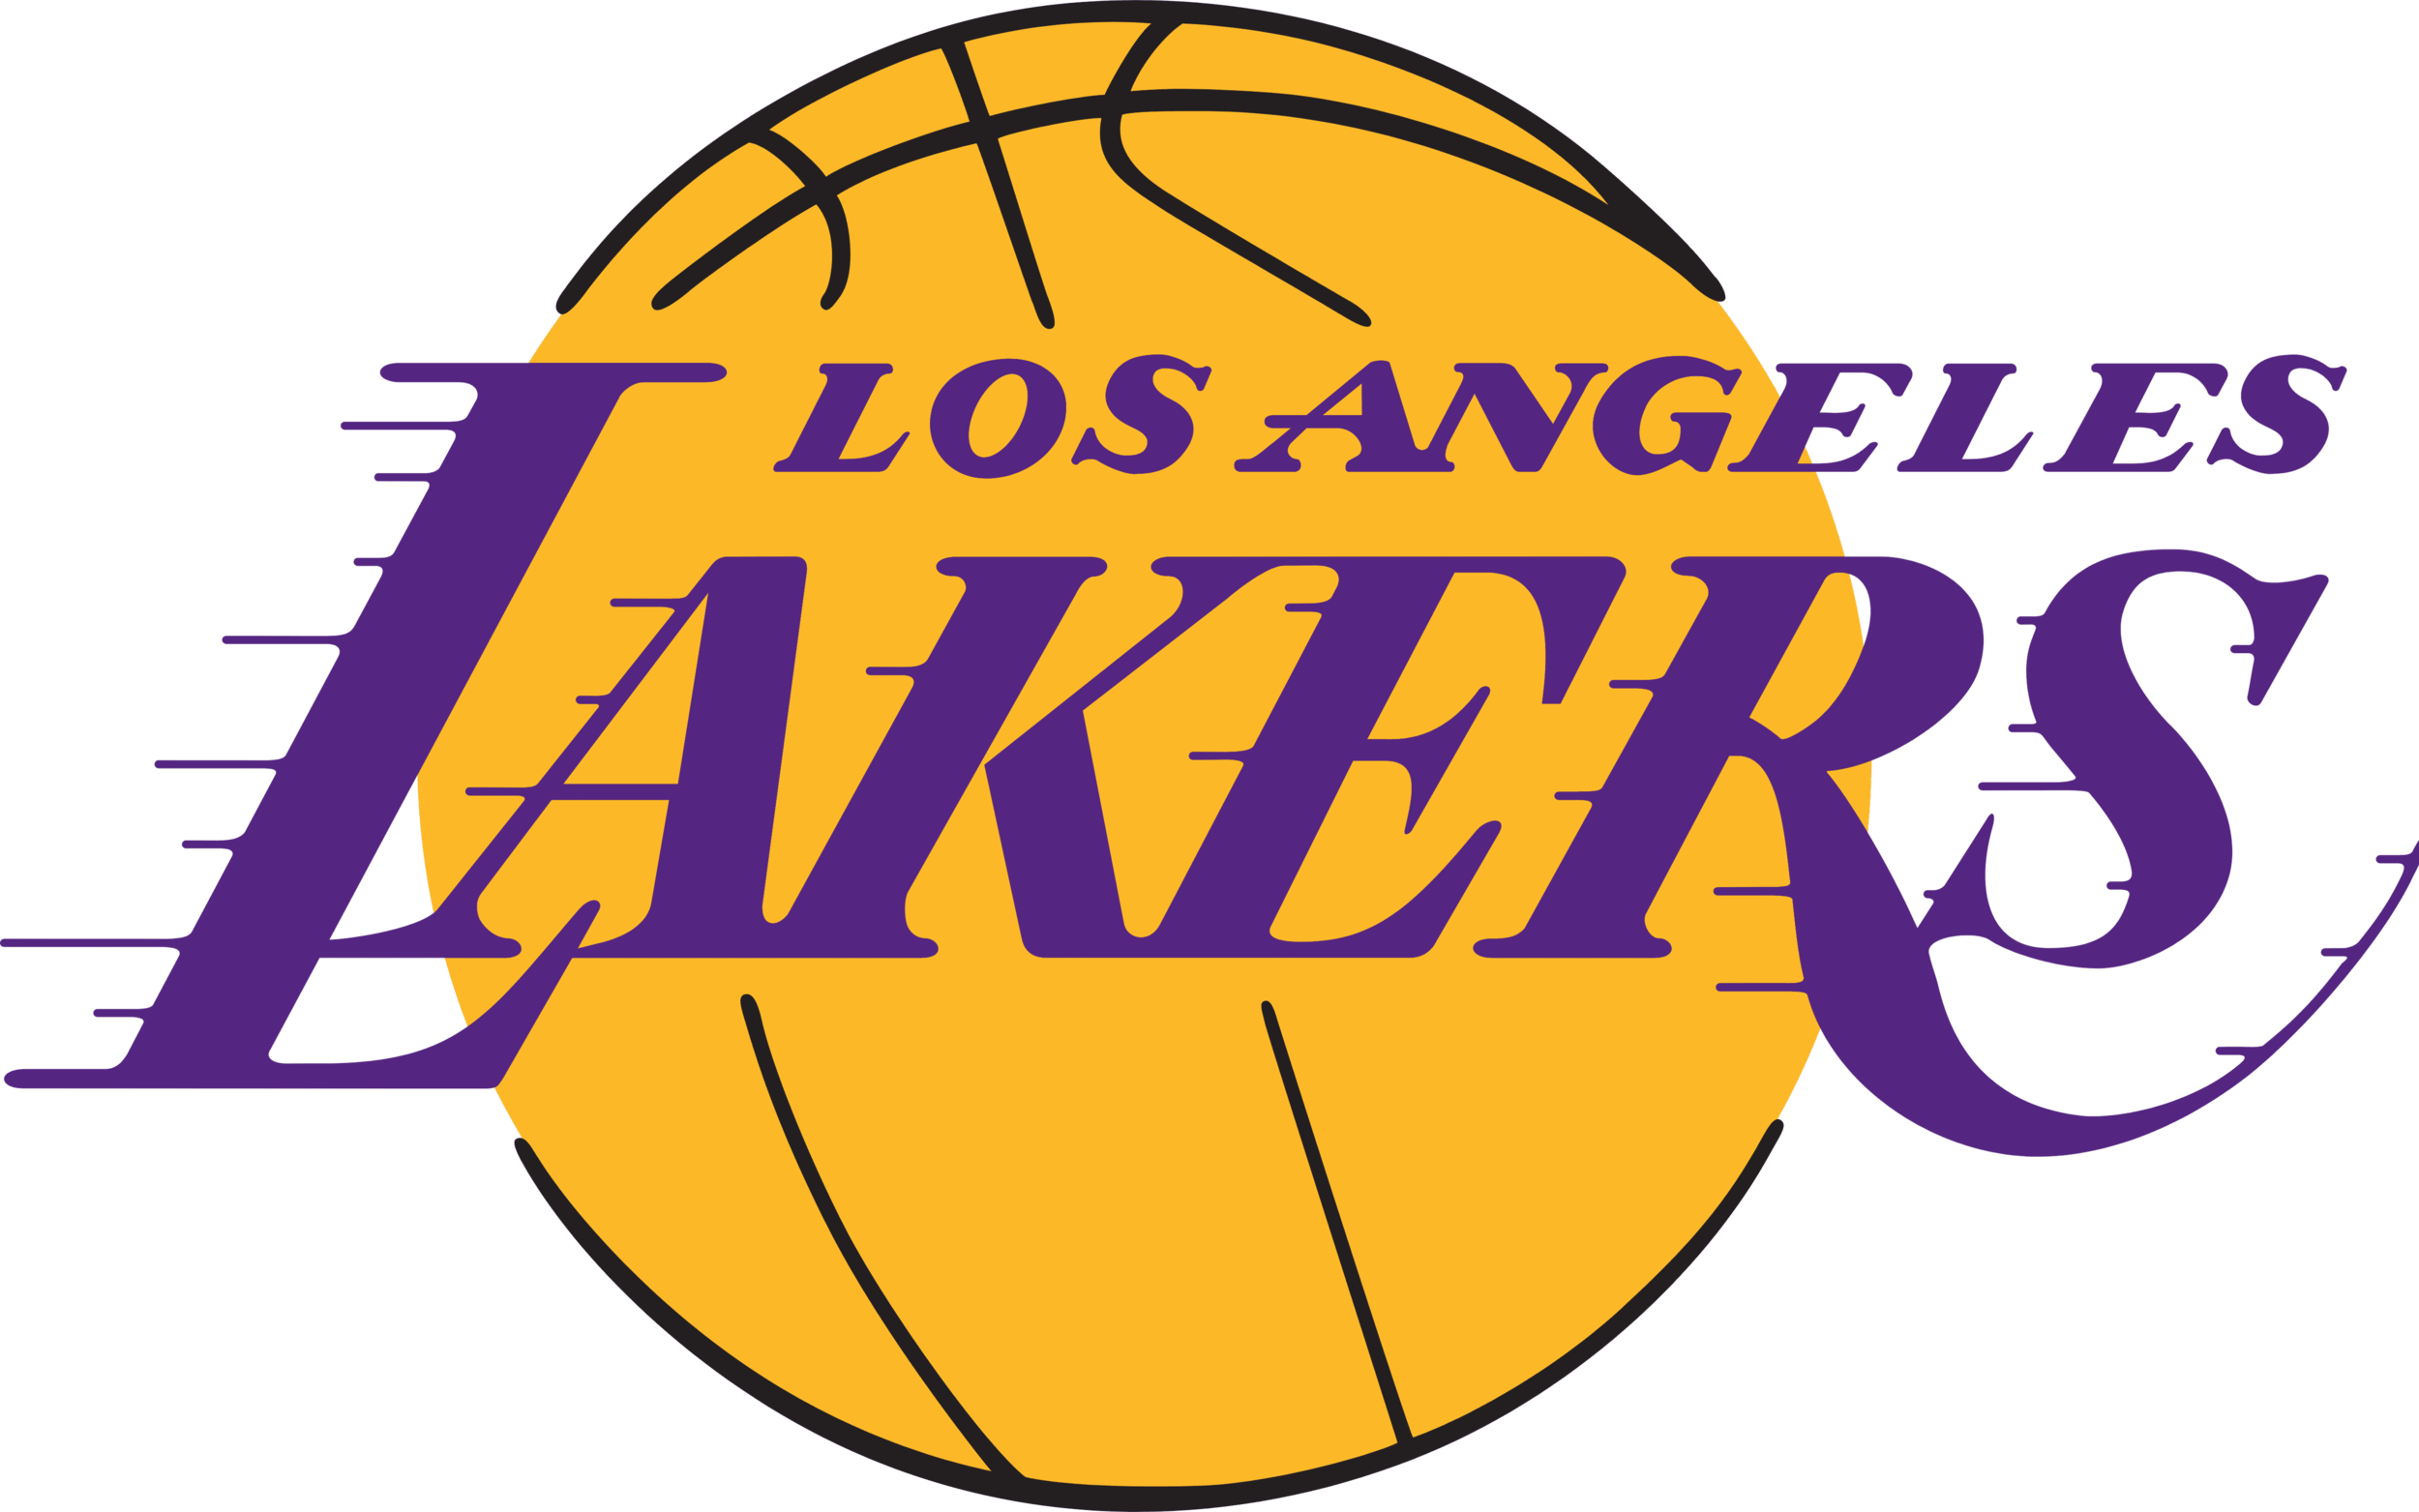 Los-angeles-lakers.png